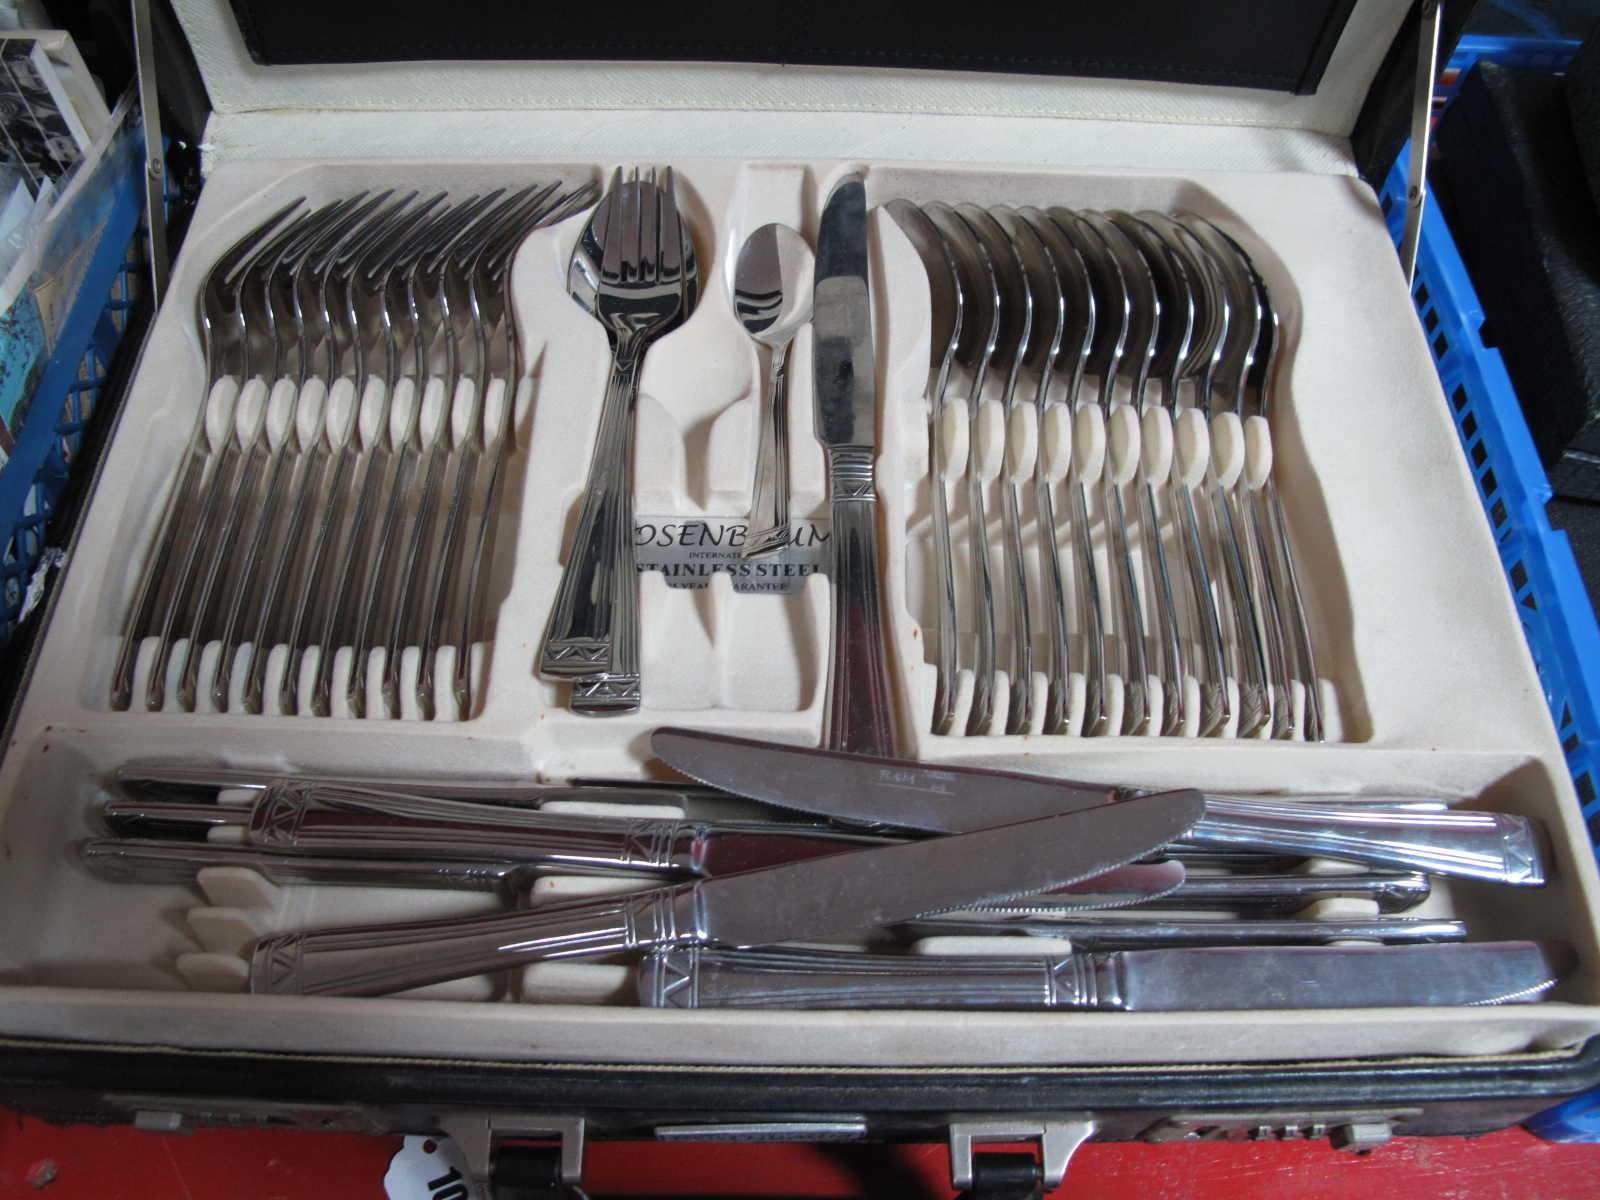 Rosenbaum Stainless Steel Cutlery, of approximately seventy three pieces, in original carry case.